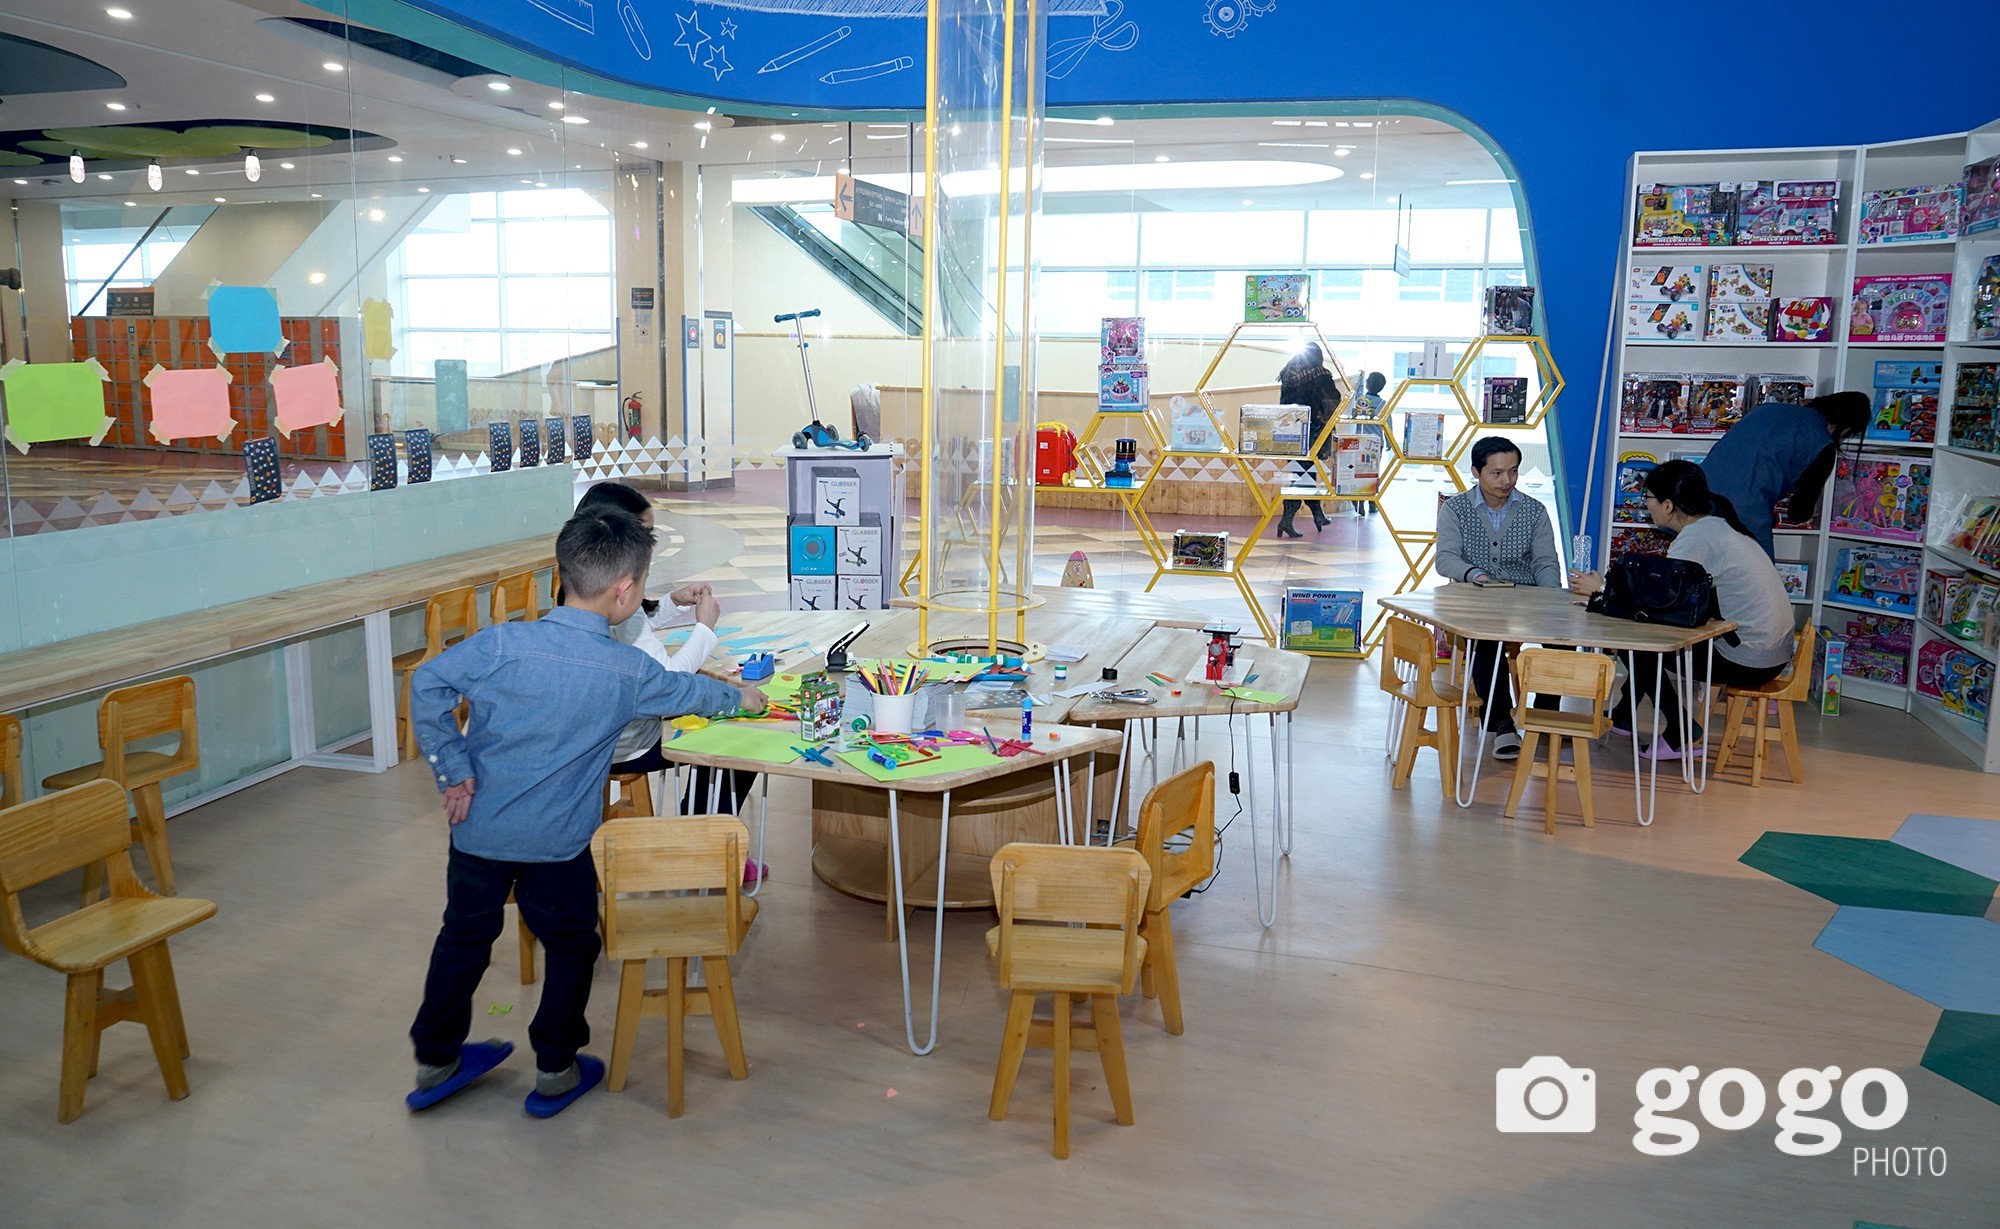 In workroom, children can create things with their parent and make unforgettable memories of their childhood. 